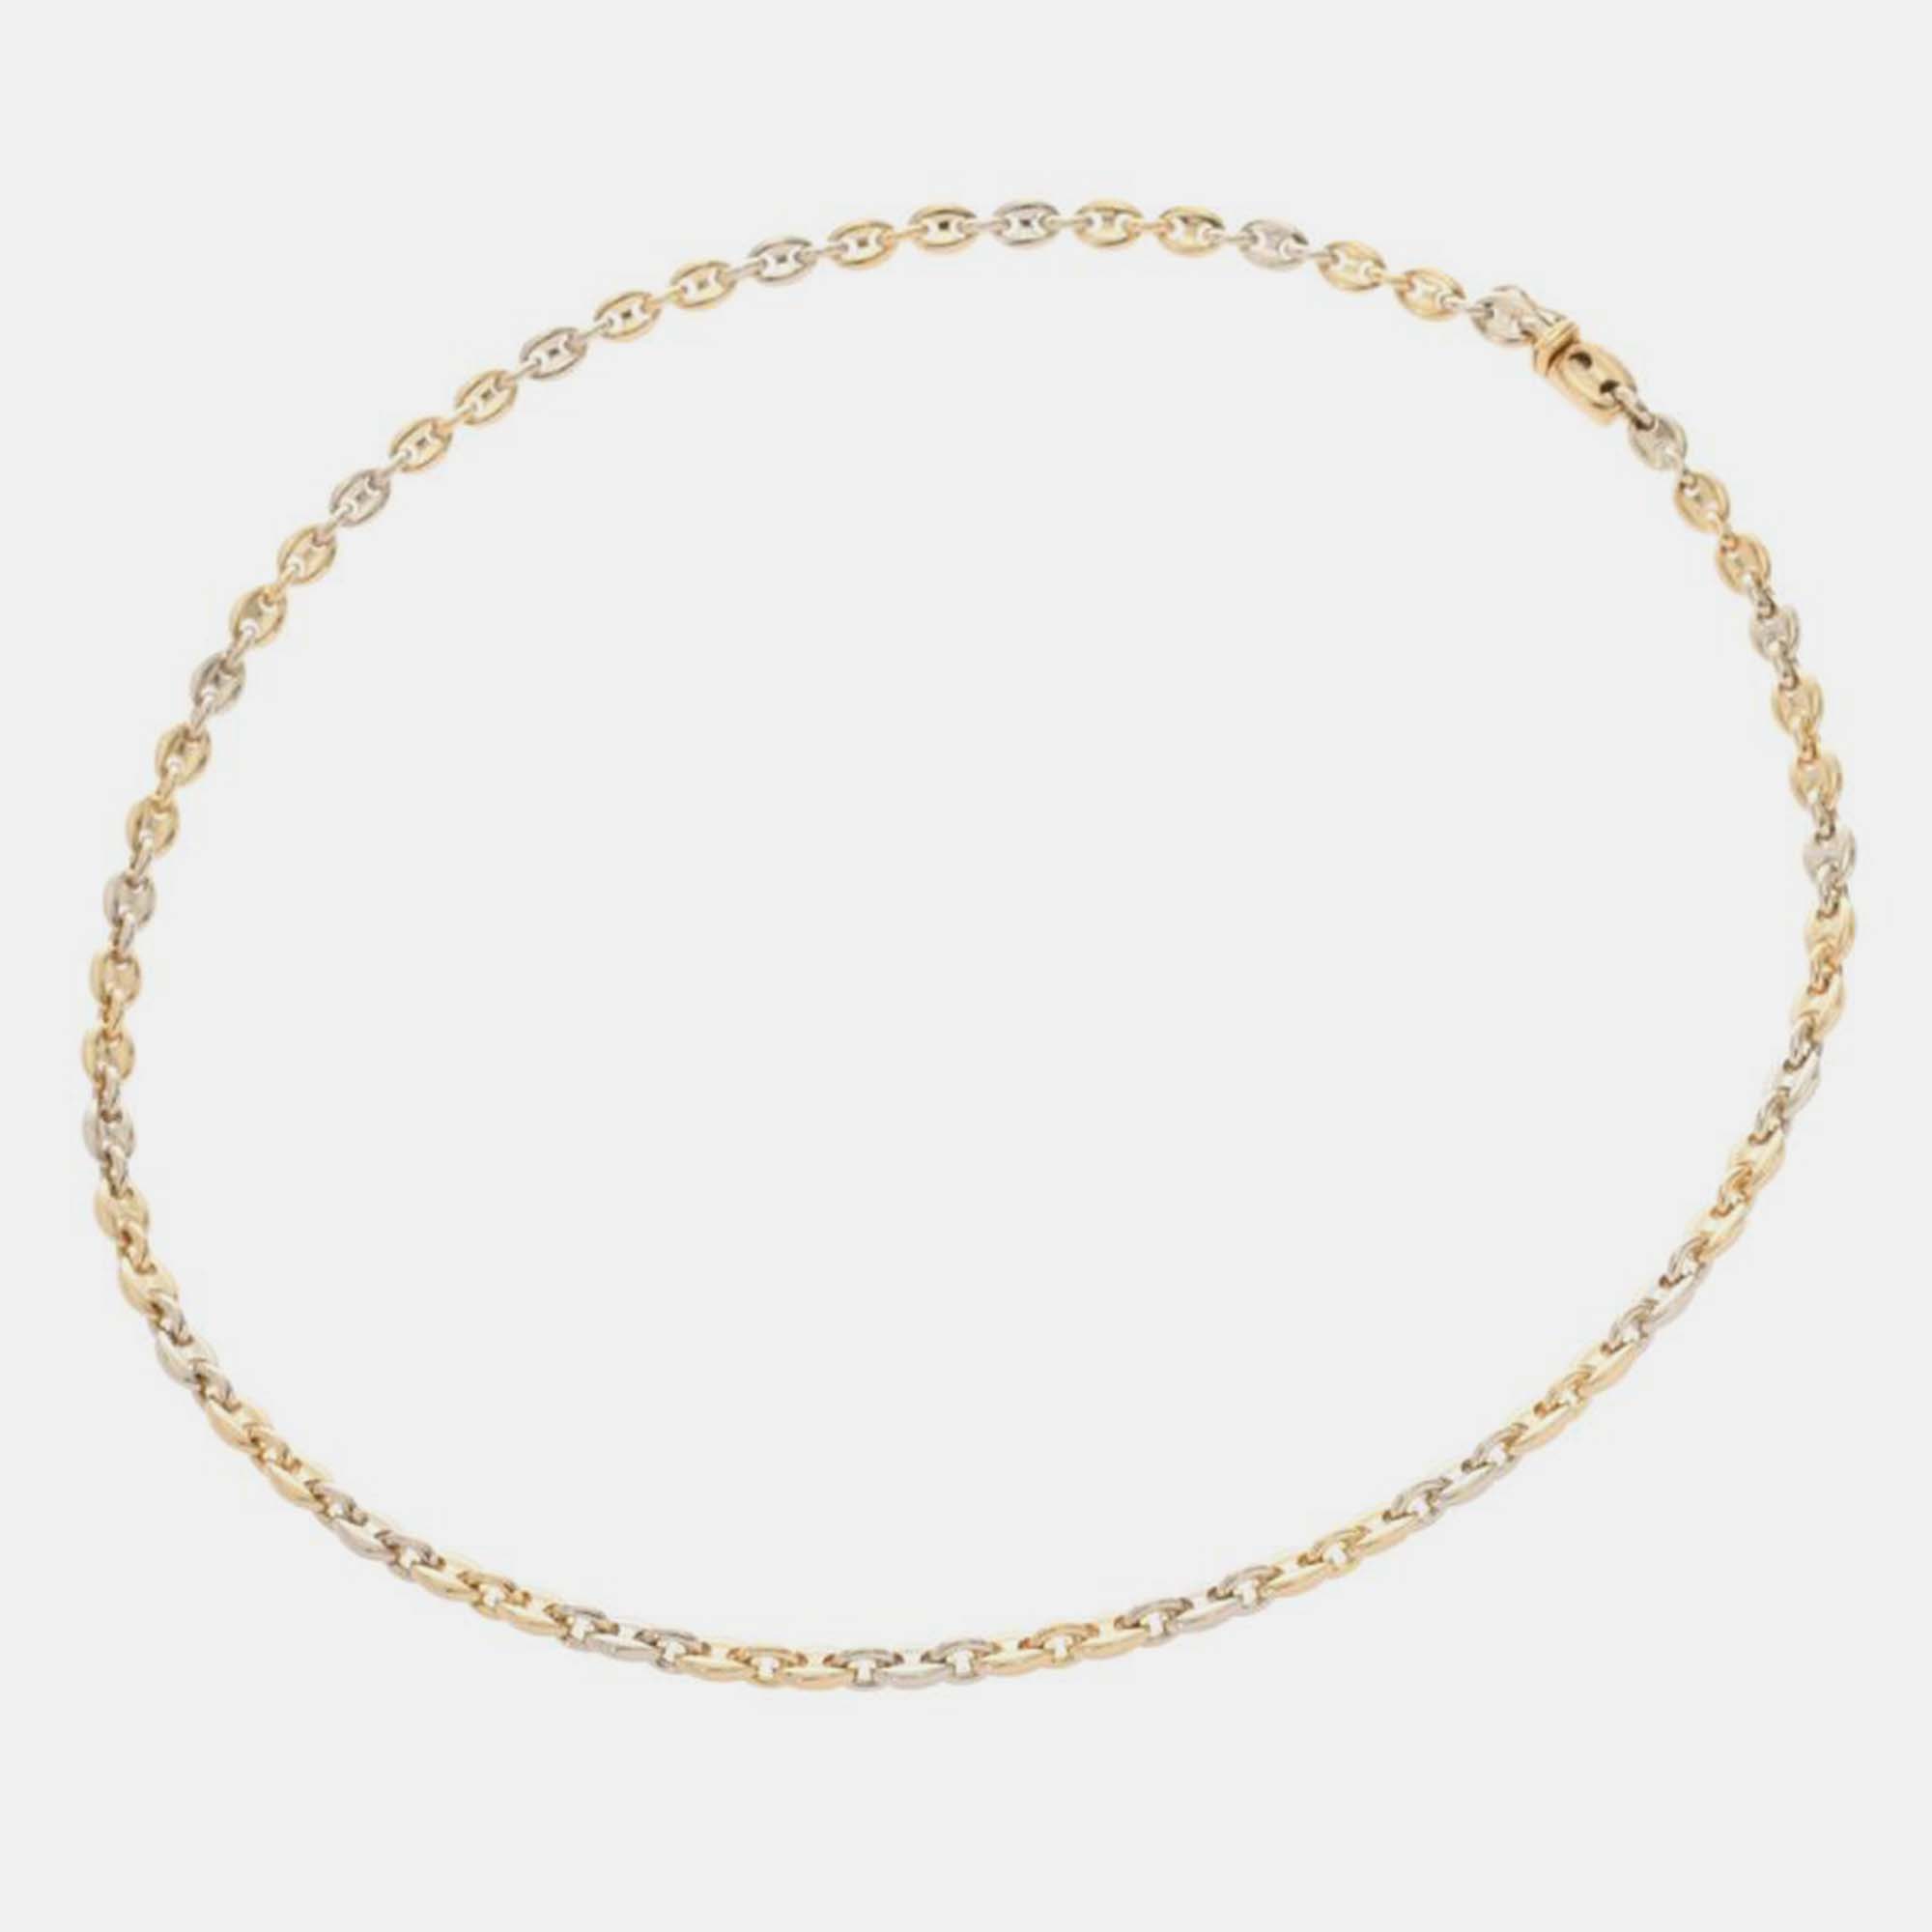 Cartier 18k yellow gold chain necklace